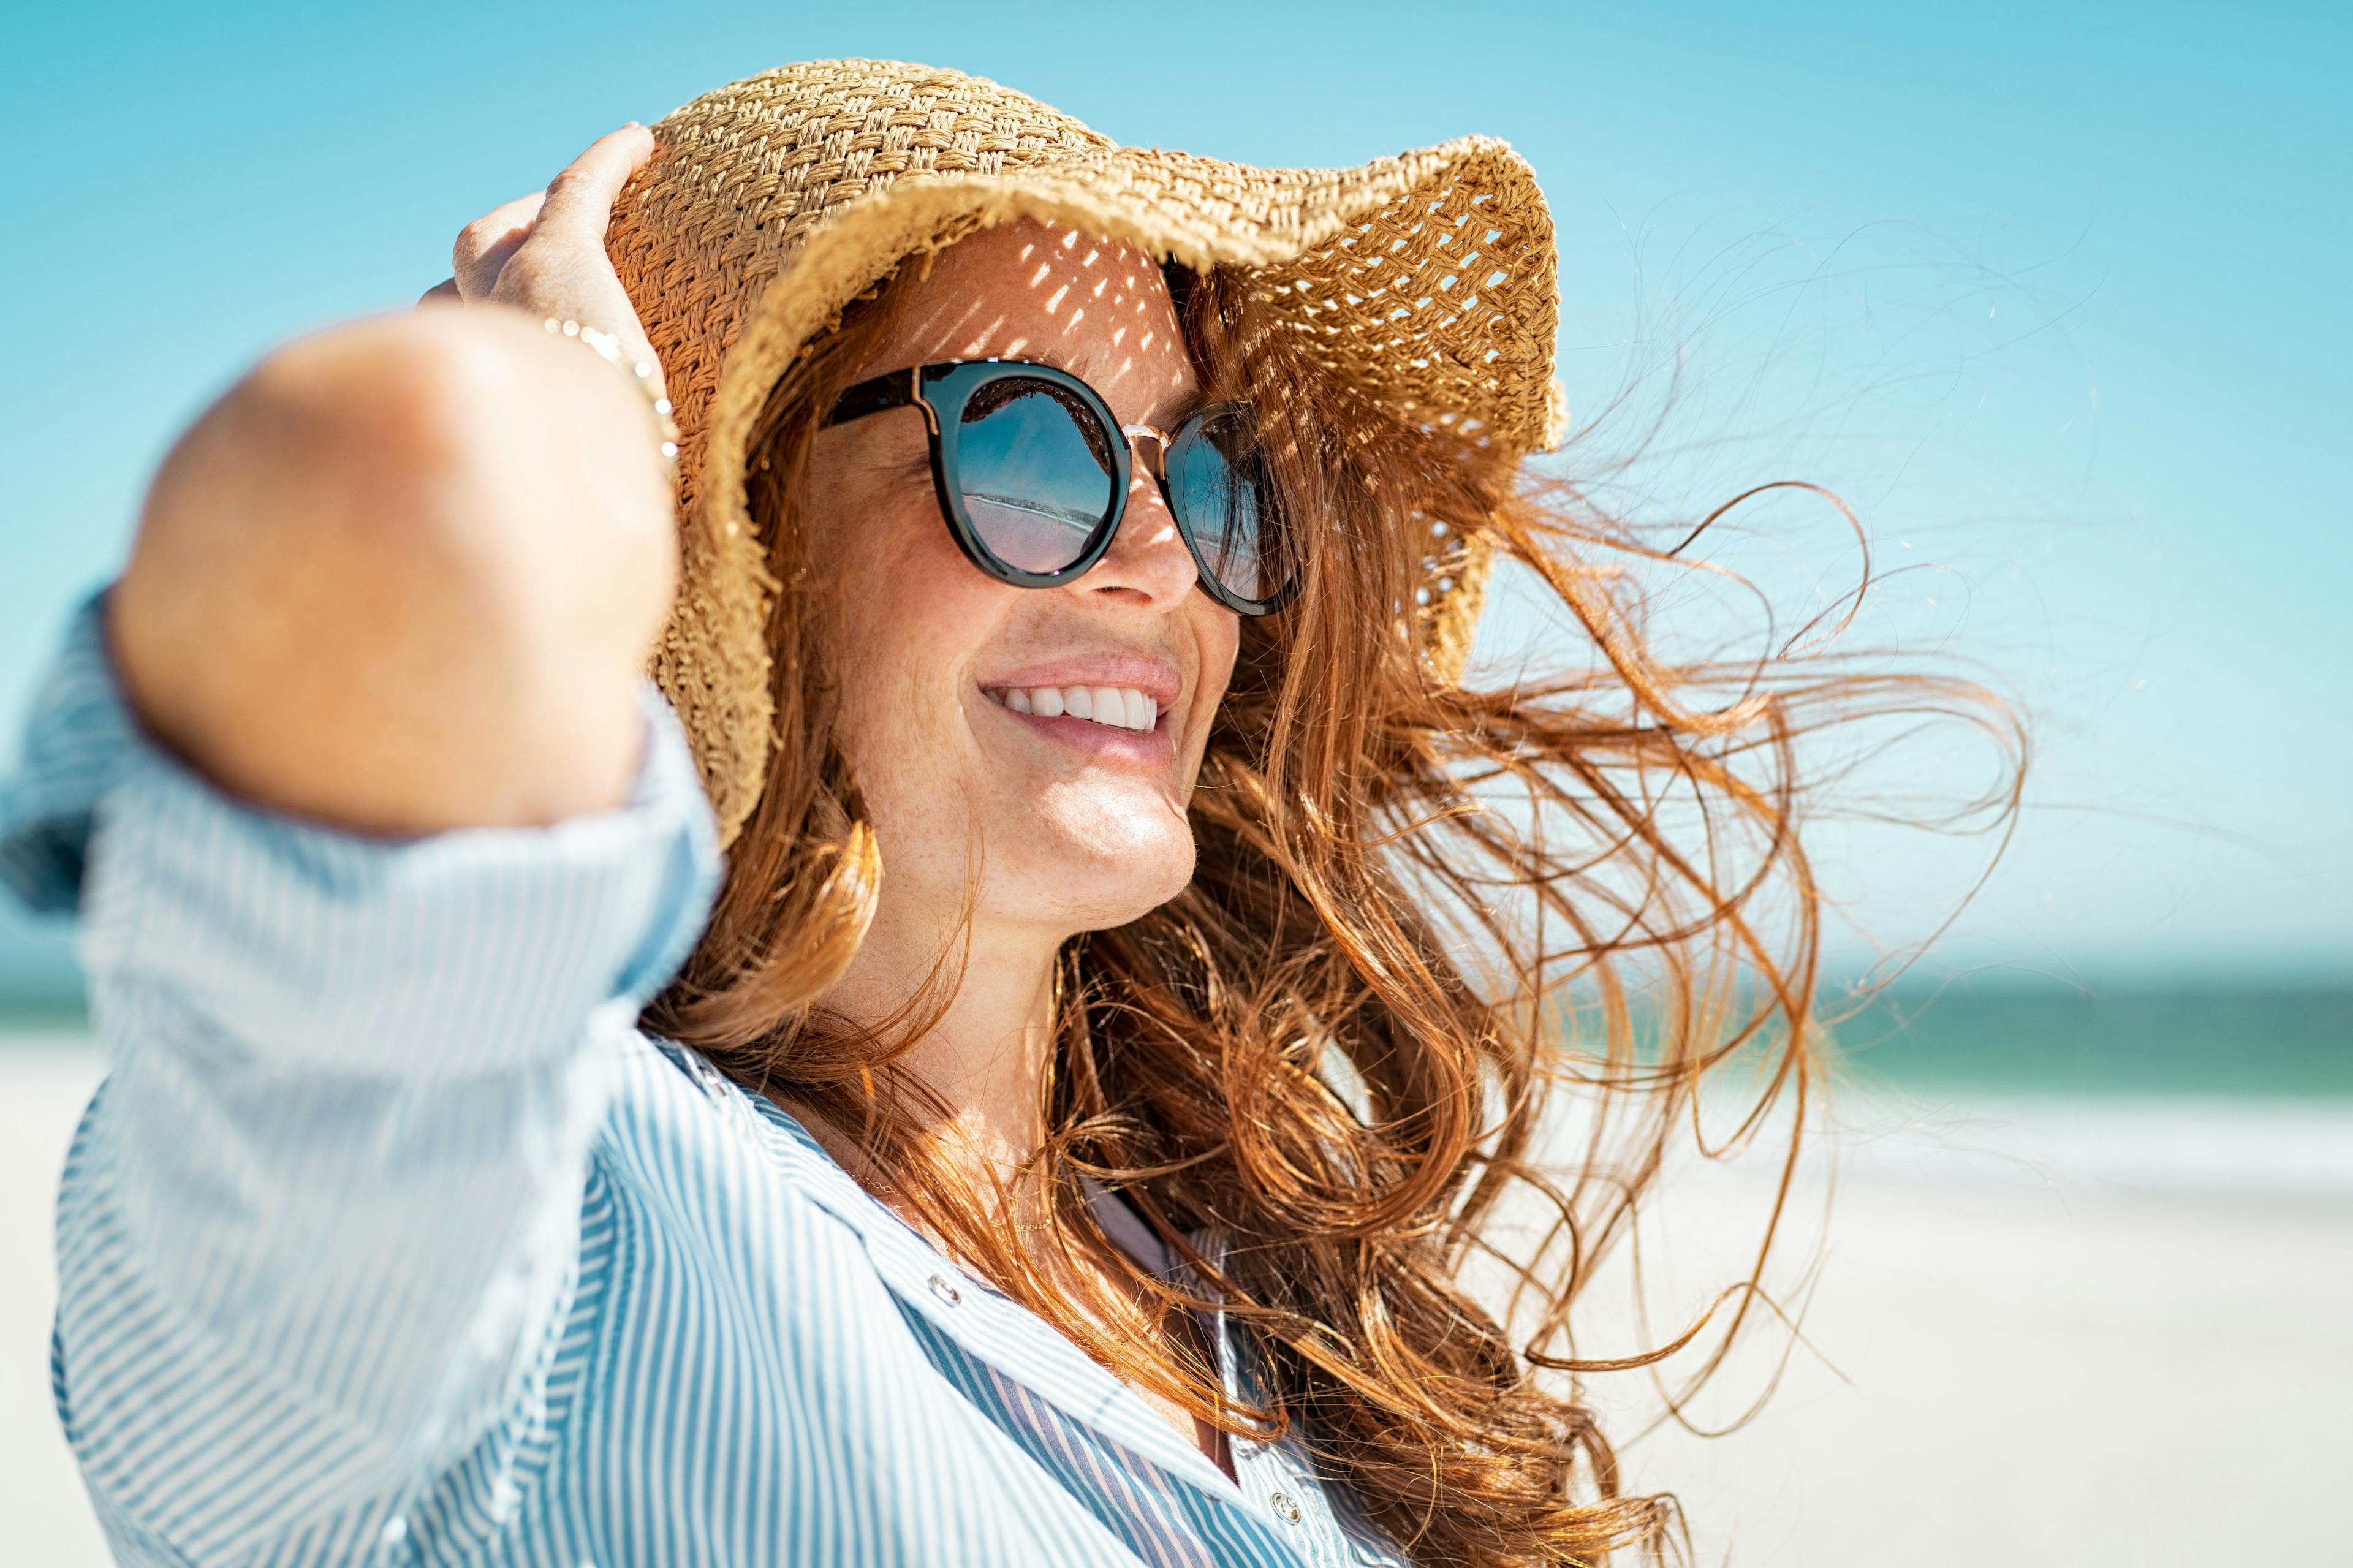 POLL: Do Your Patients Need Better Sun Protection Resources?